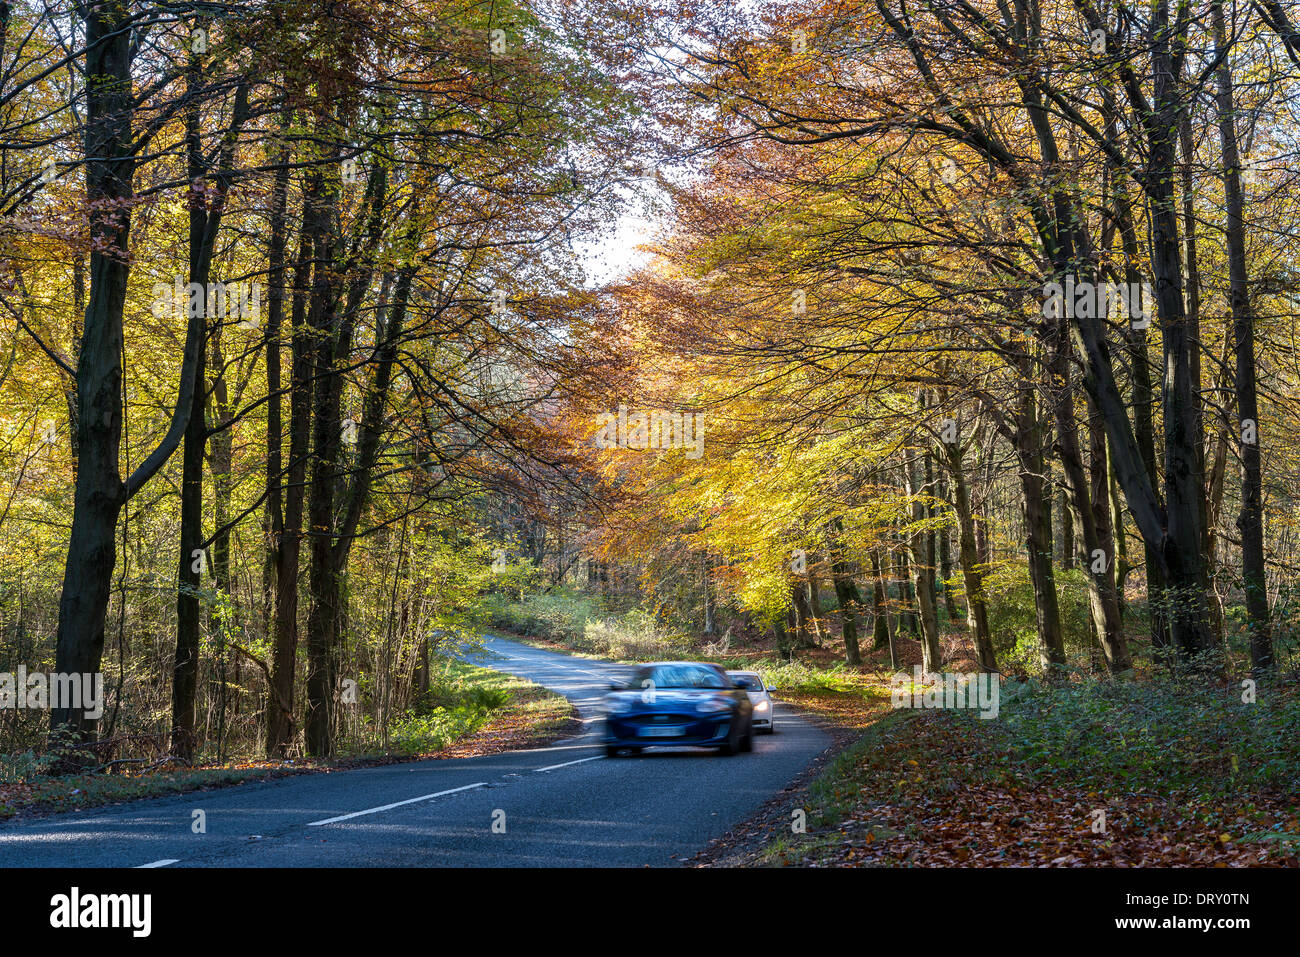 CARS ON COUNTRY ROAD WITH AUTUMN TREES IN FOREST OF DEAN GLOUCESTERSHIRE ENGLAND UK Stock Photo